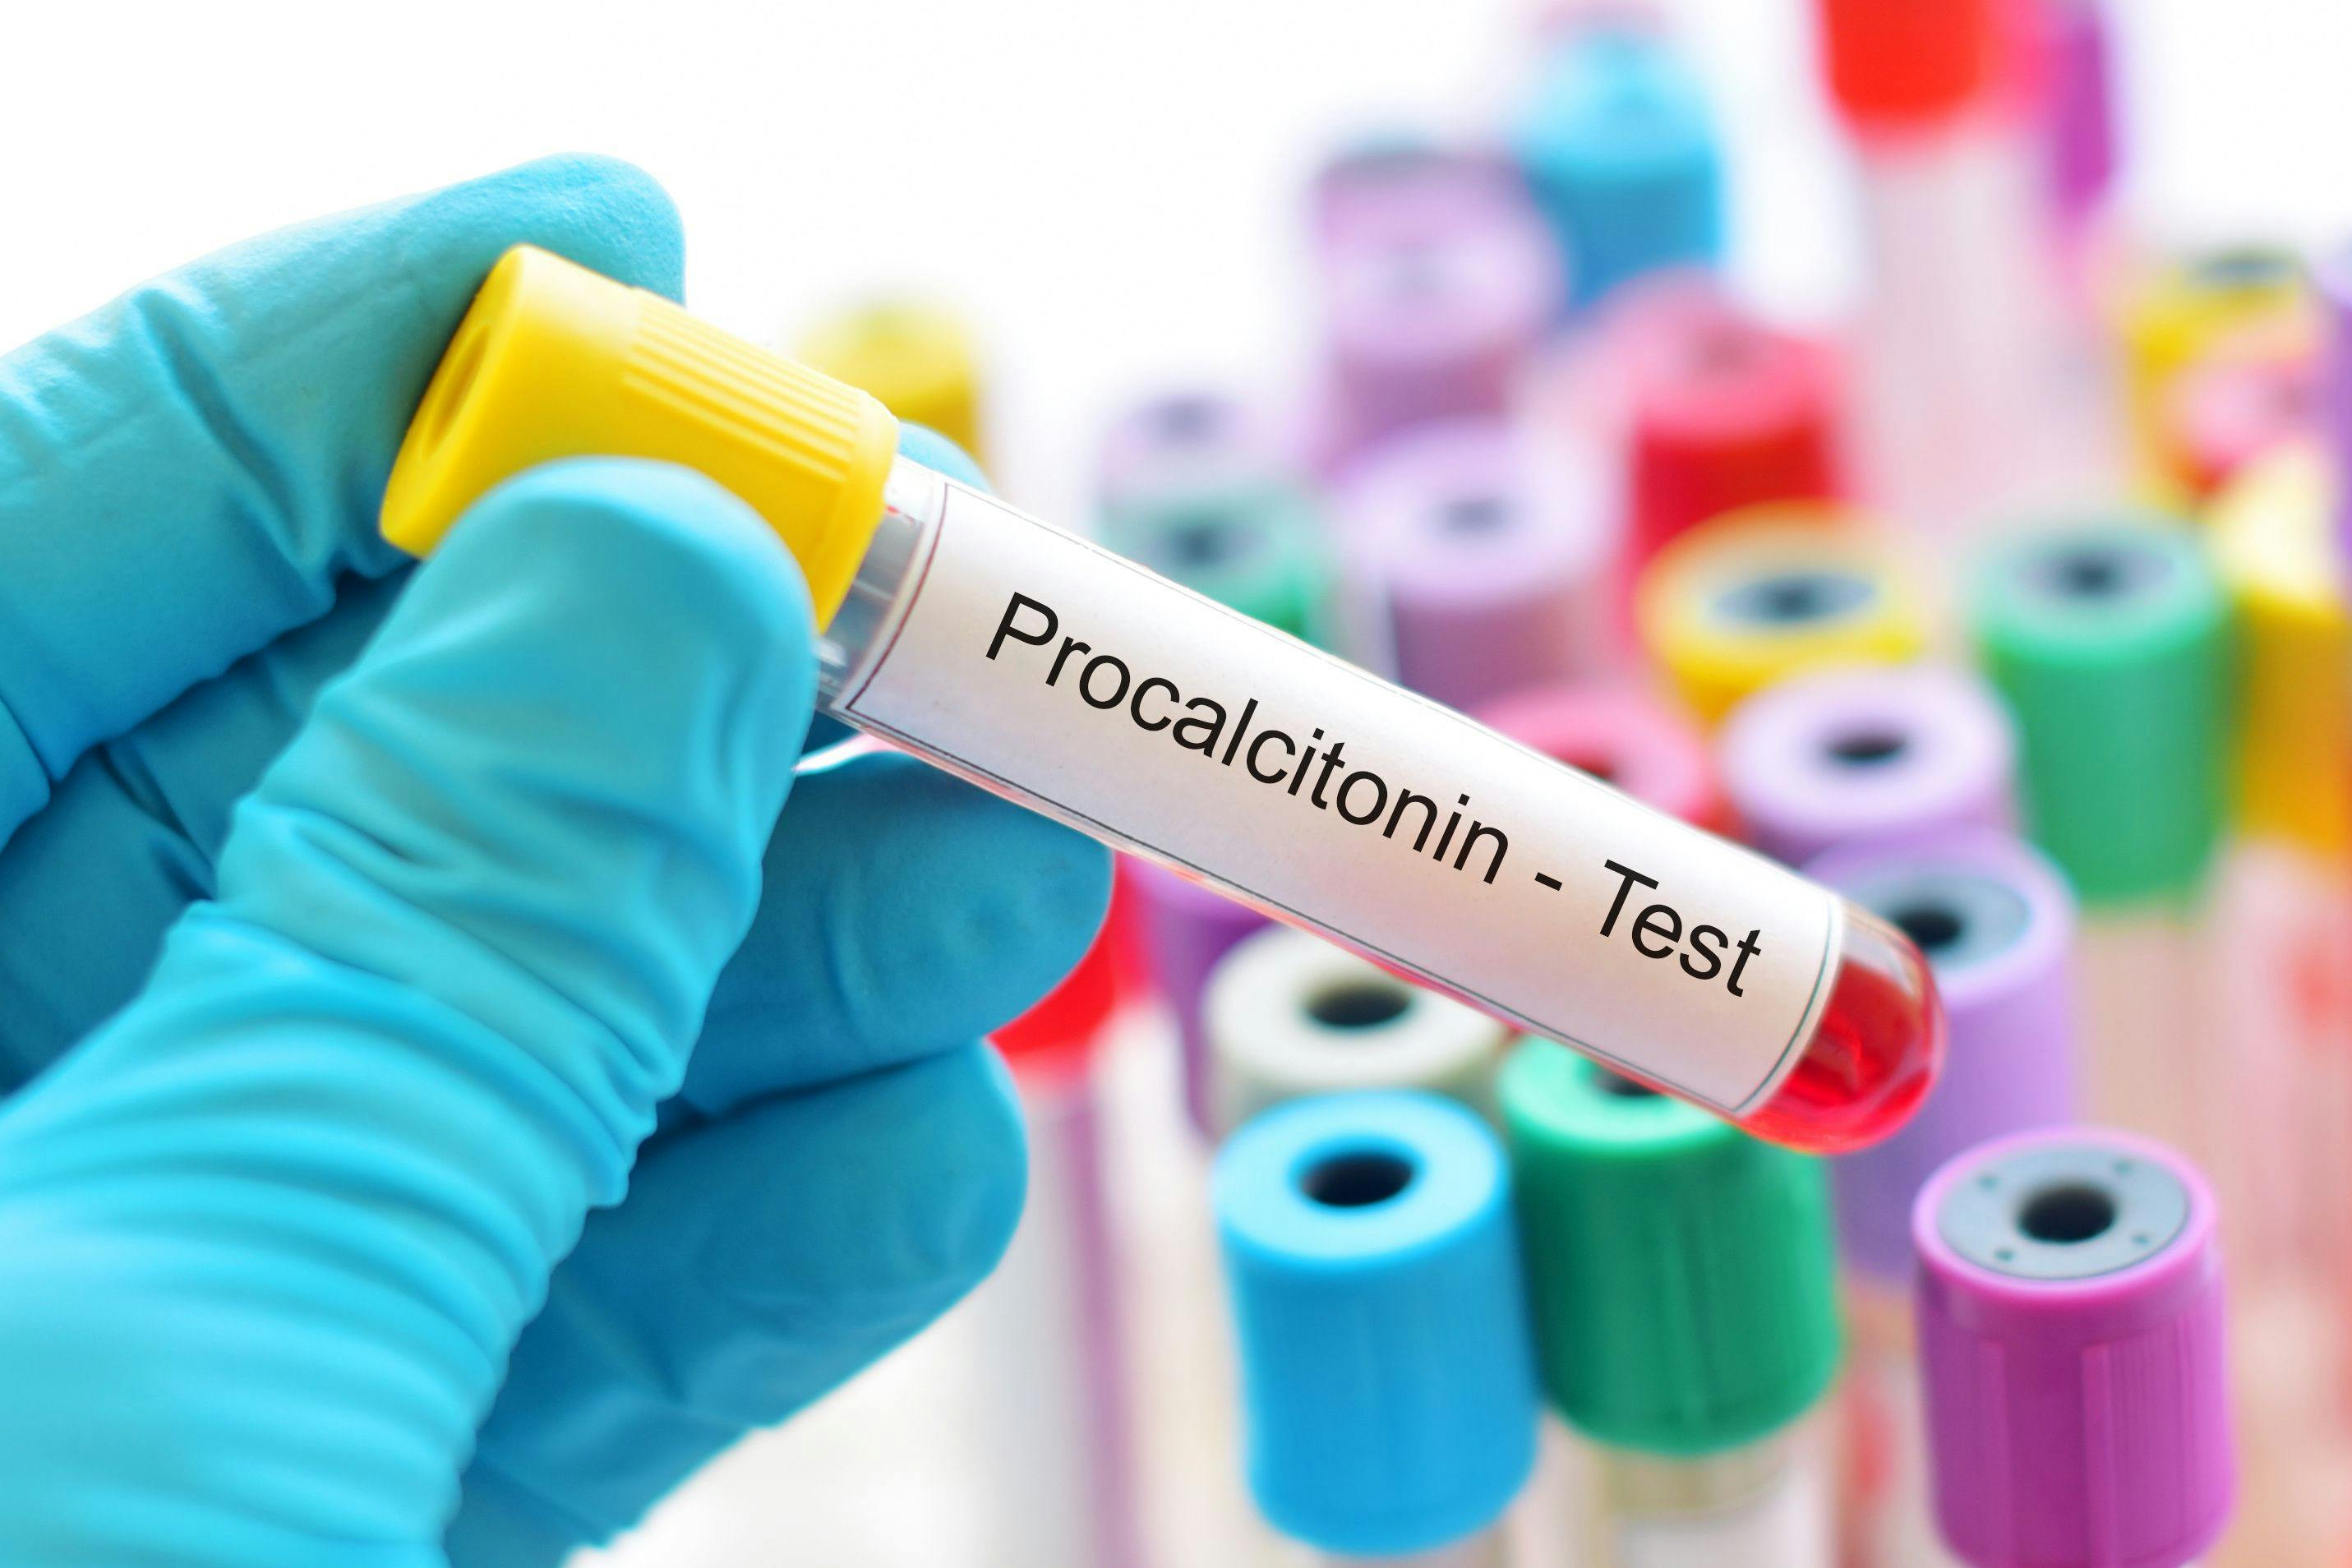 Testing Procalcitonin Levels to Guide Antimicrobial Stewardship